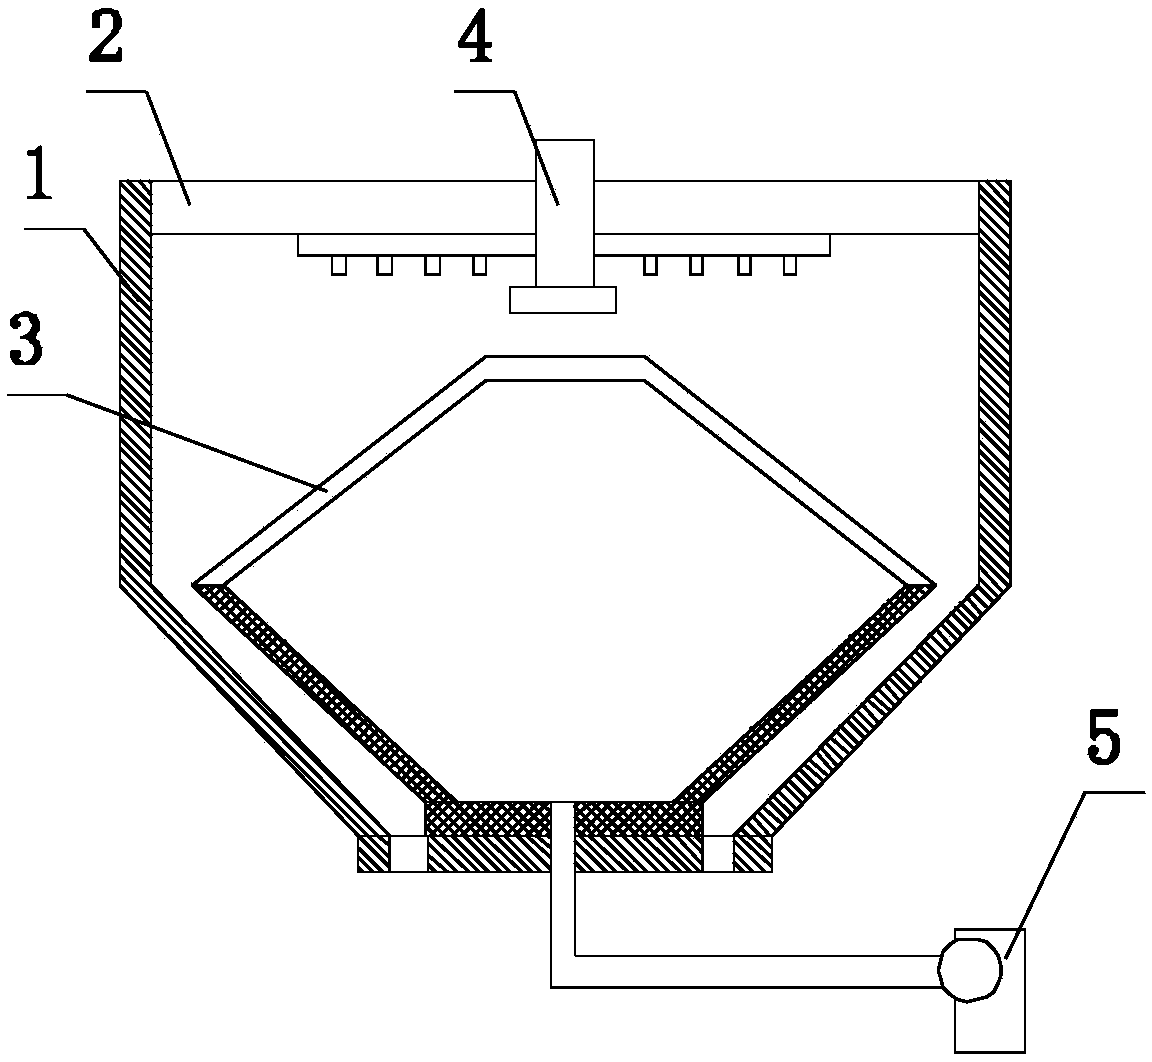 Double-layer tubular rice drying device with uniform material distribution